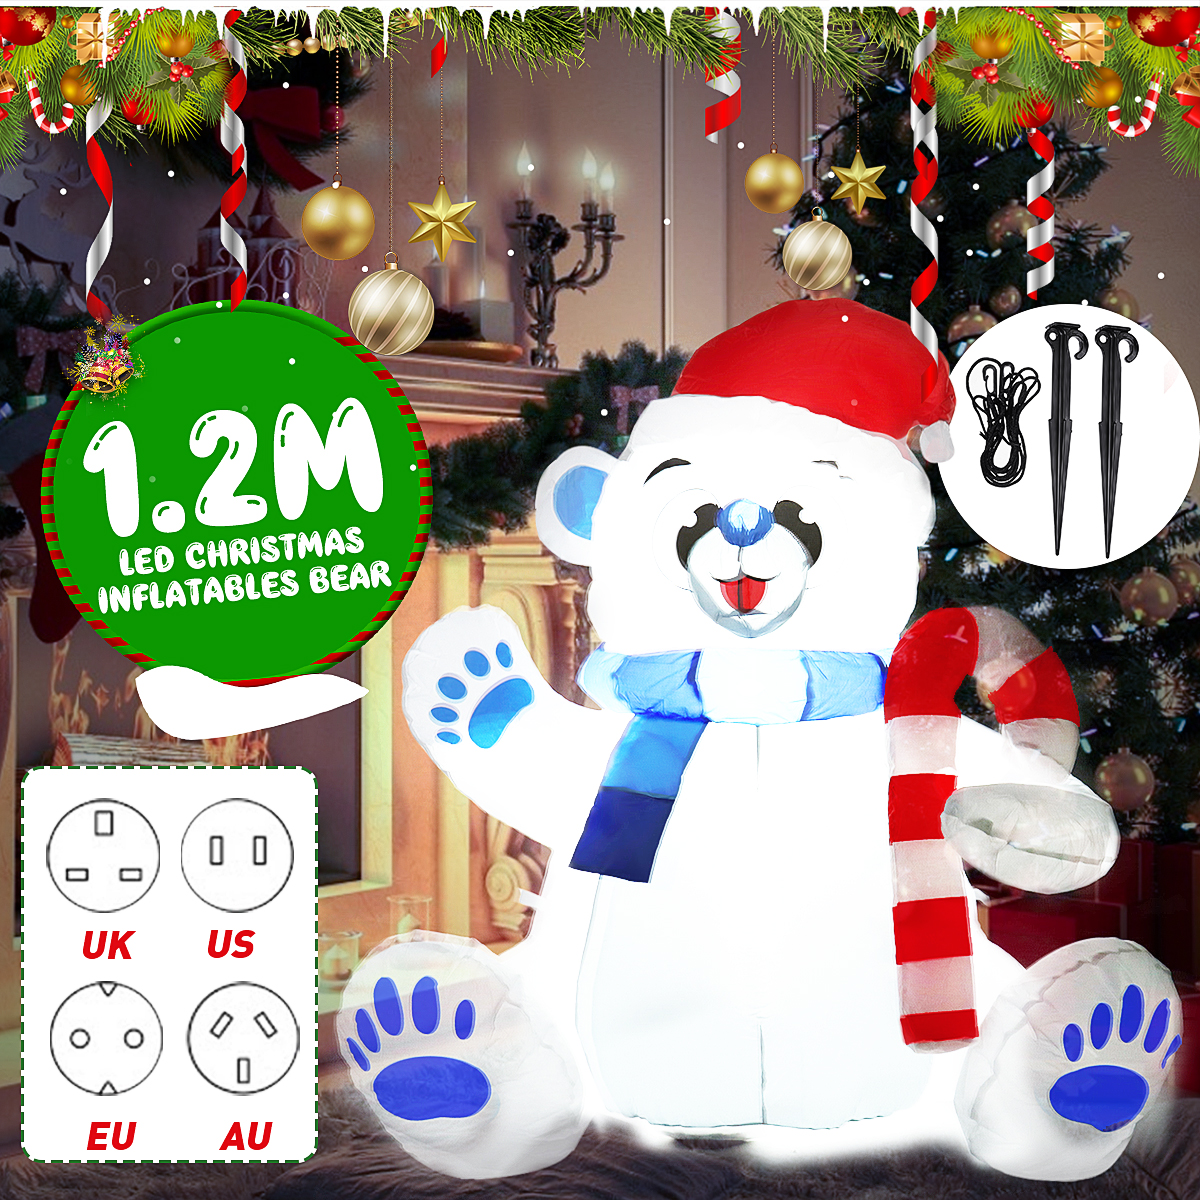 12M-LED-Christmas-Waterproof-Polyester-Built-In-Blower-UV-resistant-Inflatable-Bear-Toy-for-Christma-1829733-2